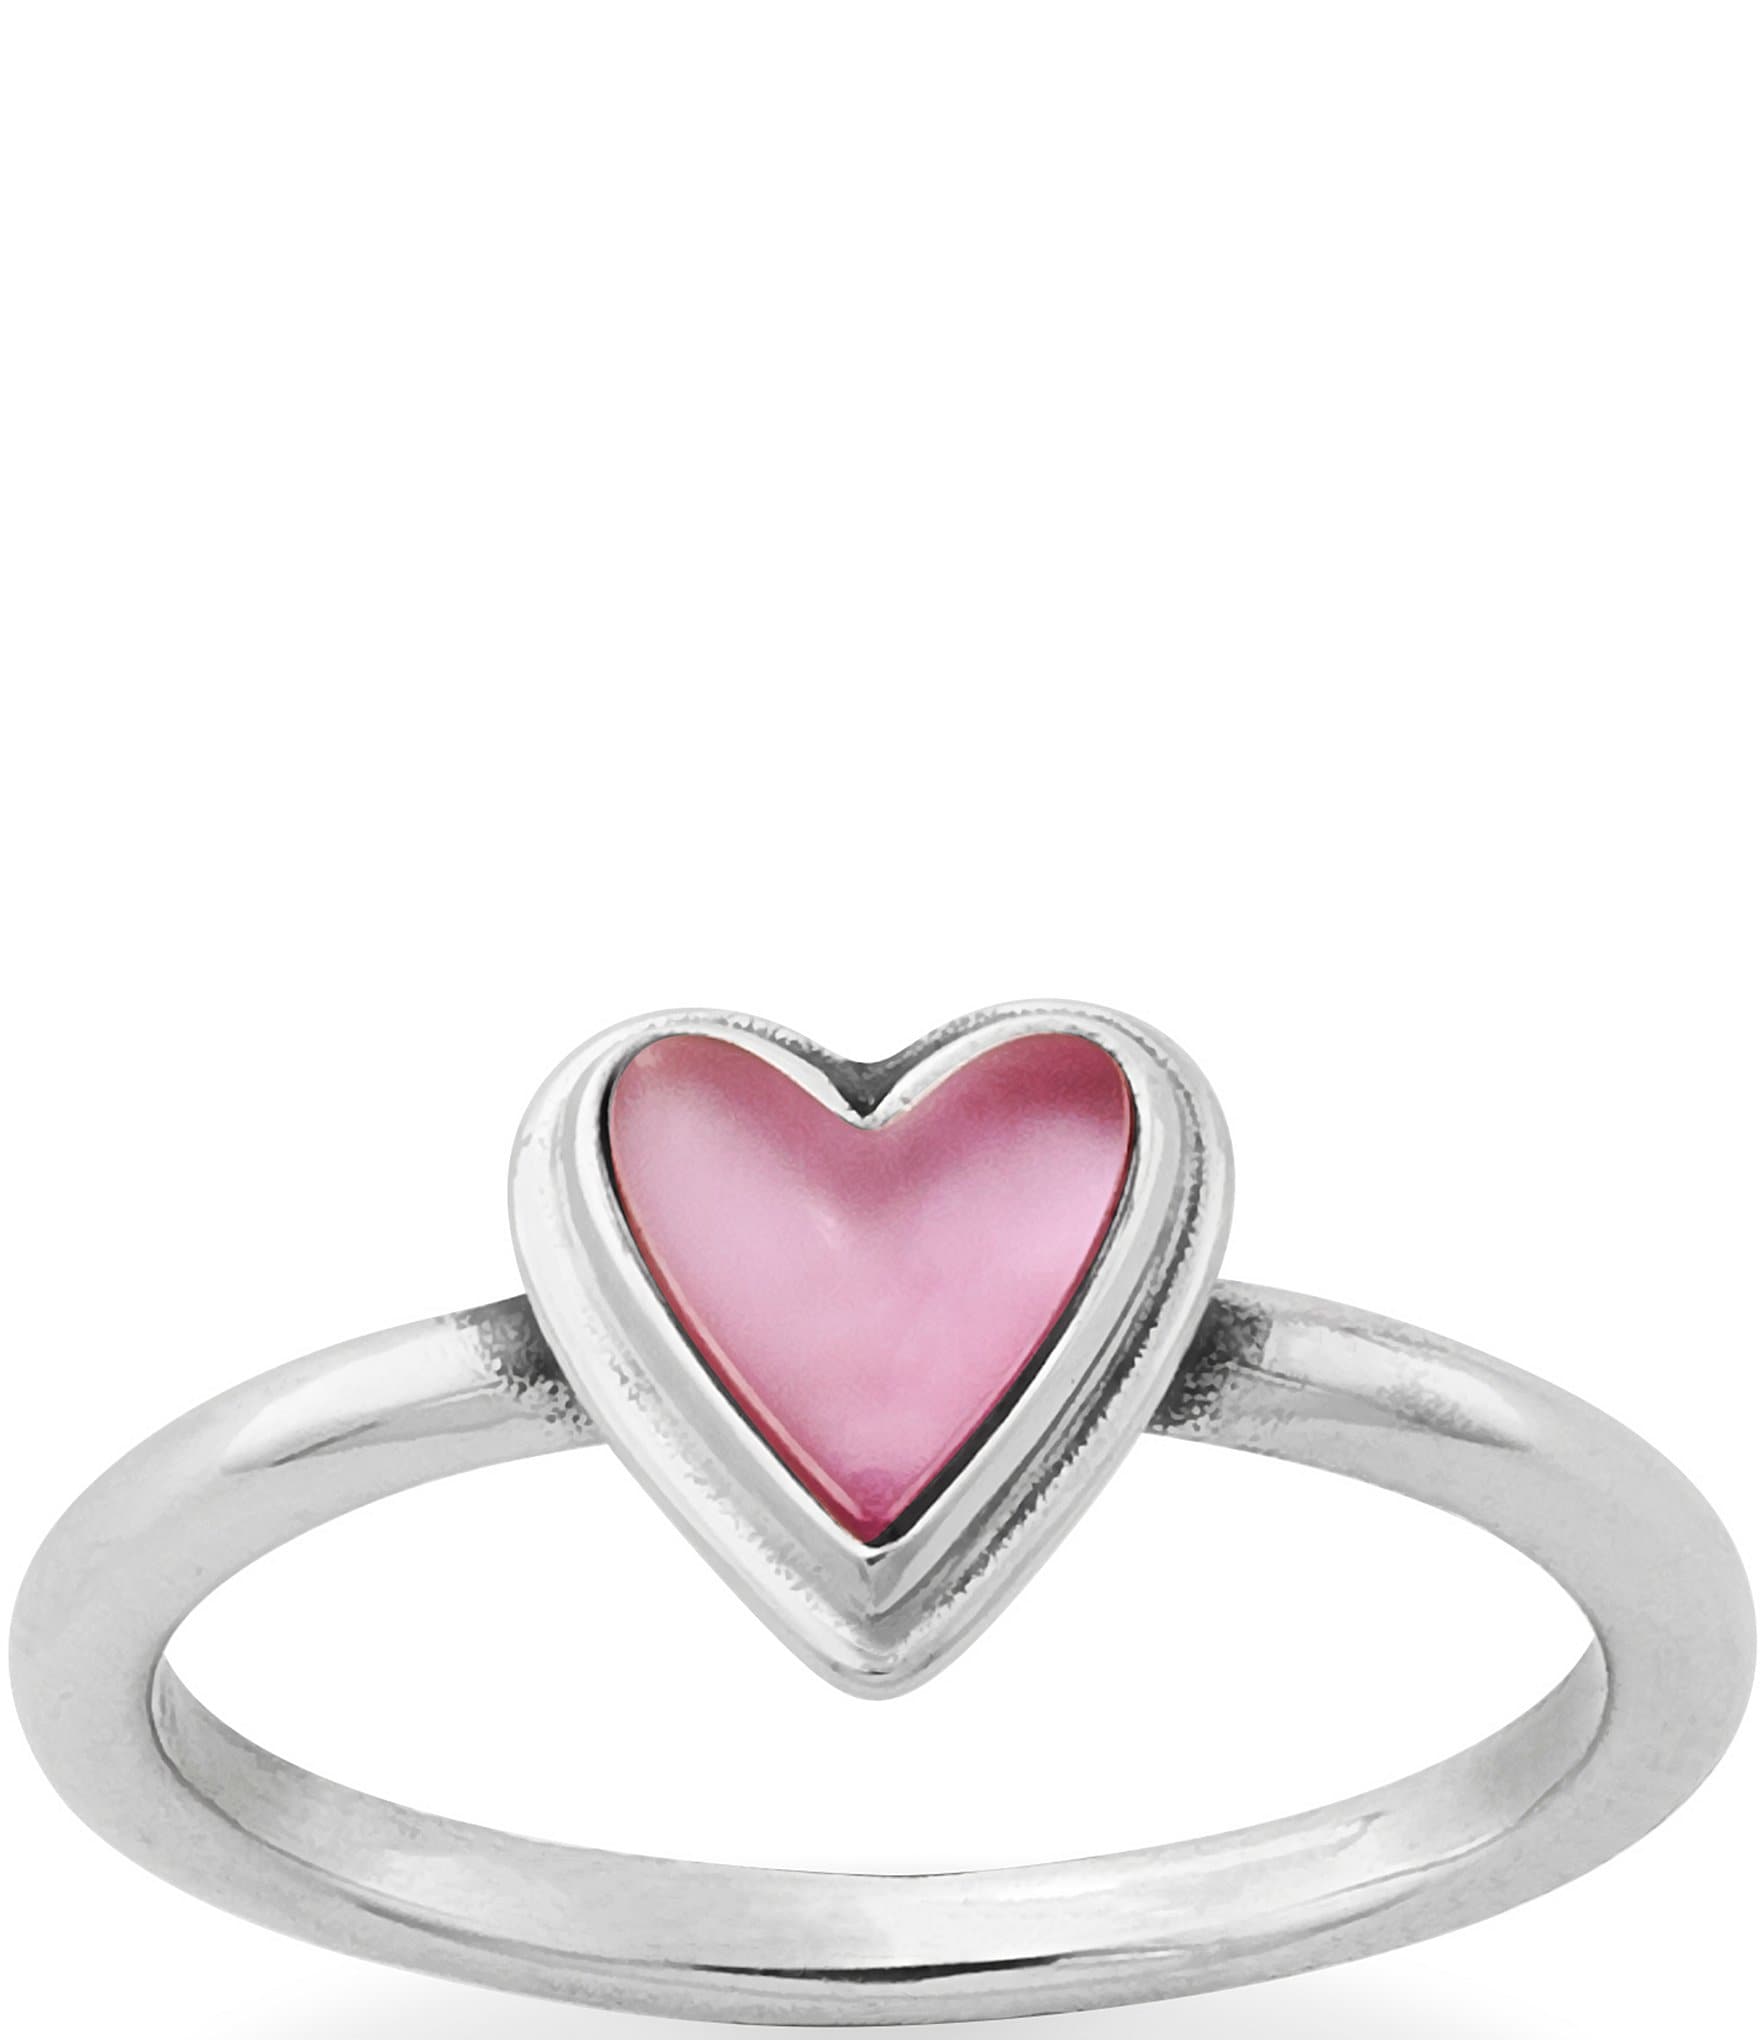 James Avery Sweetheart Pink Doublet Ring - 8